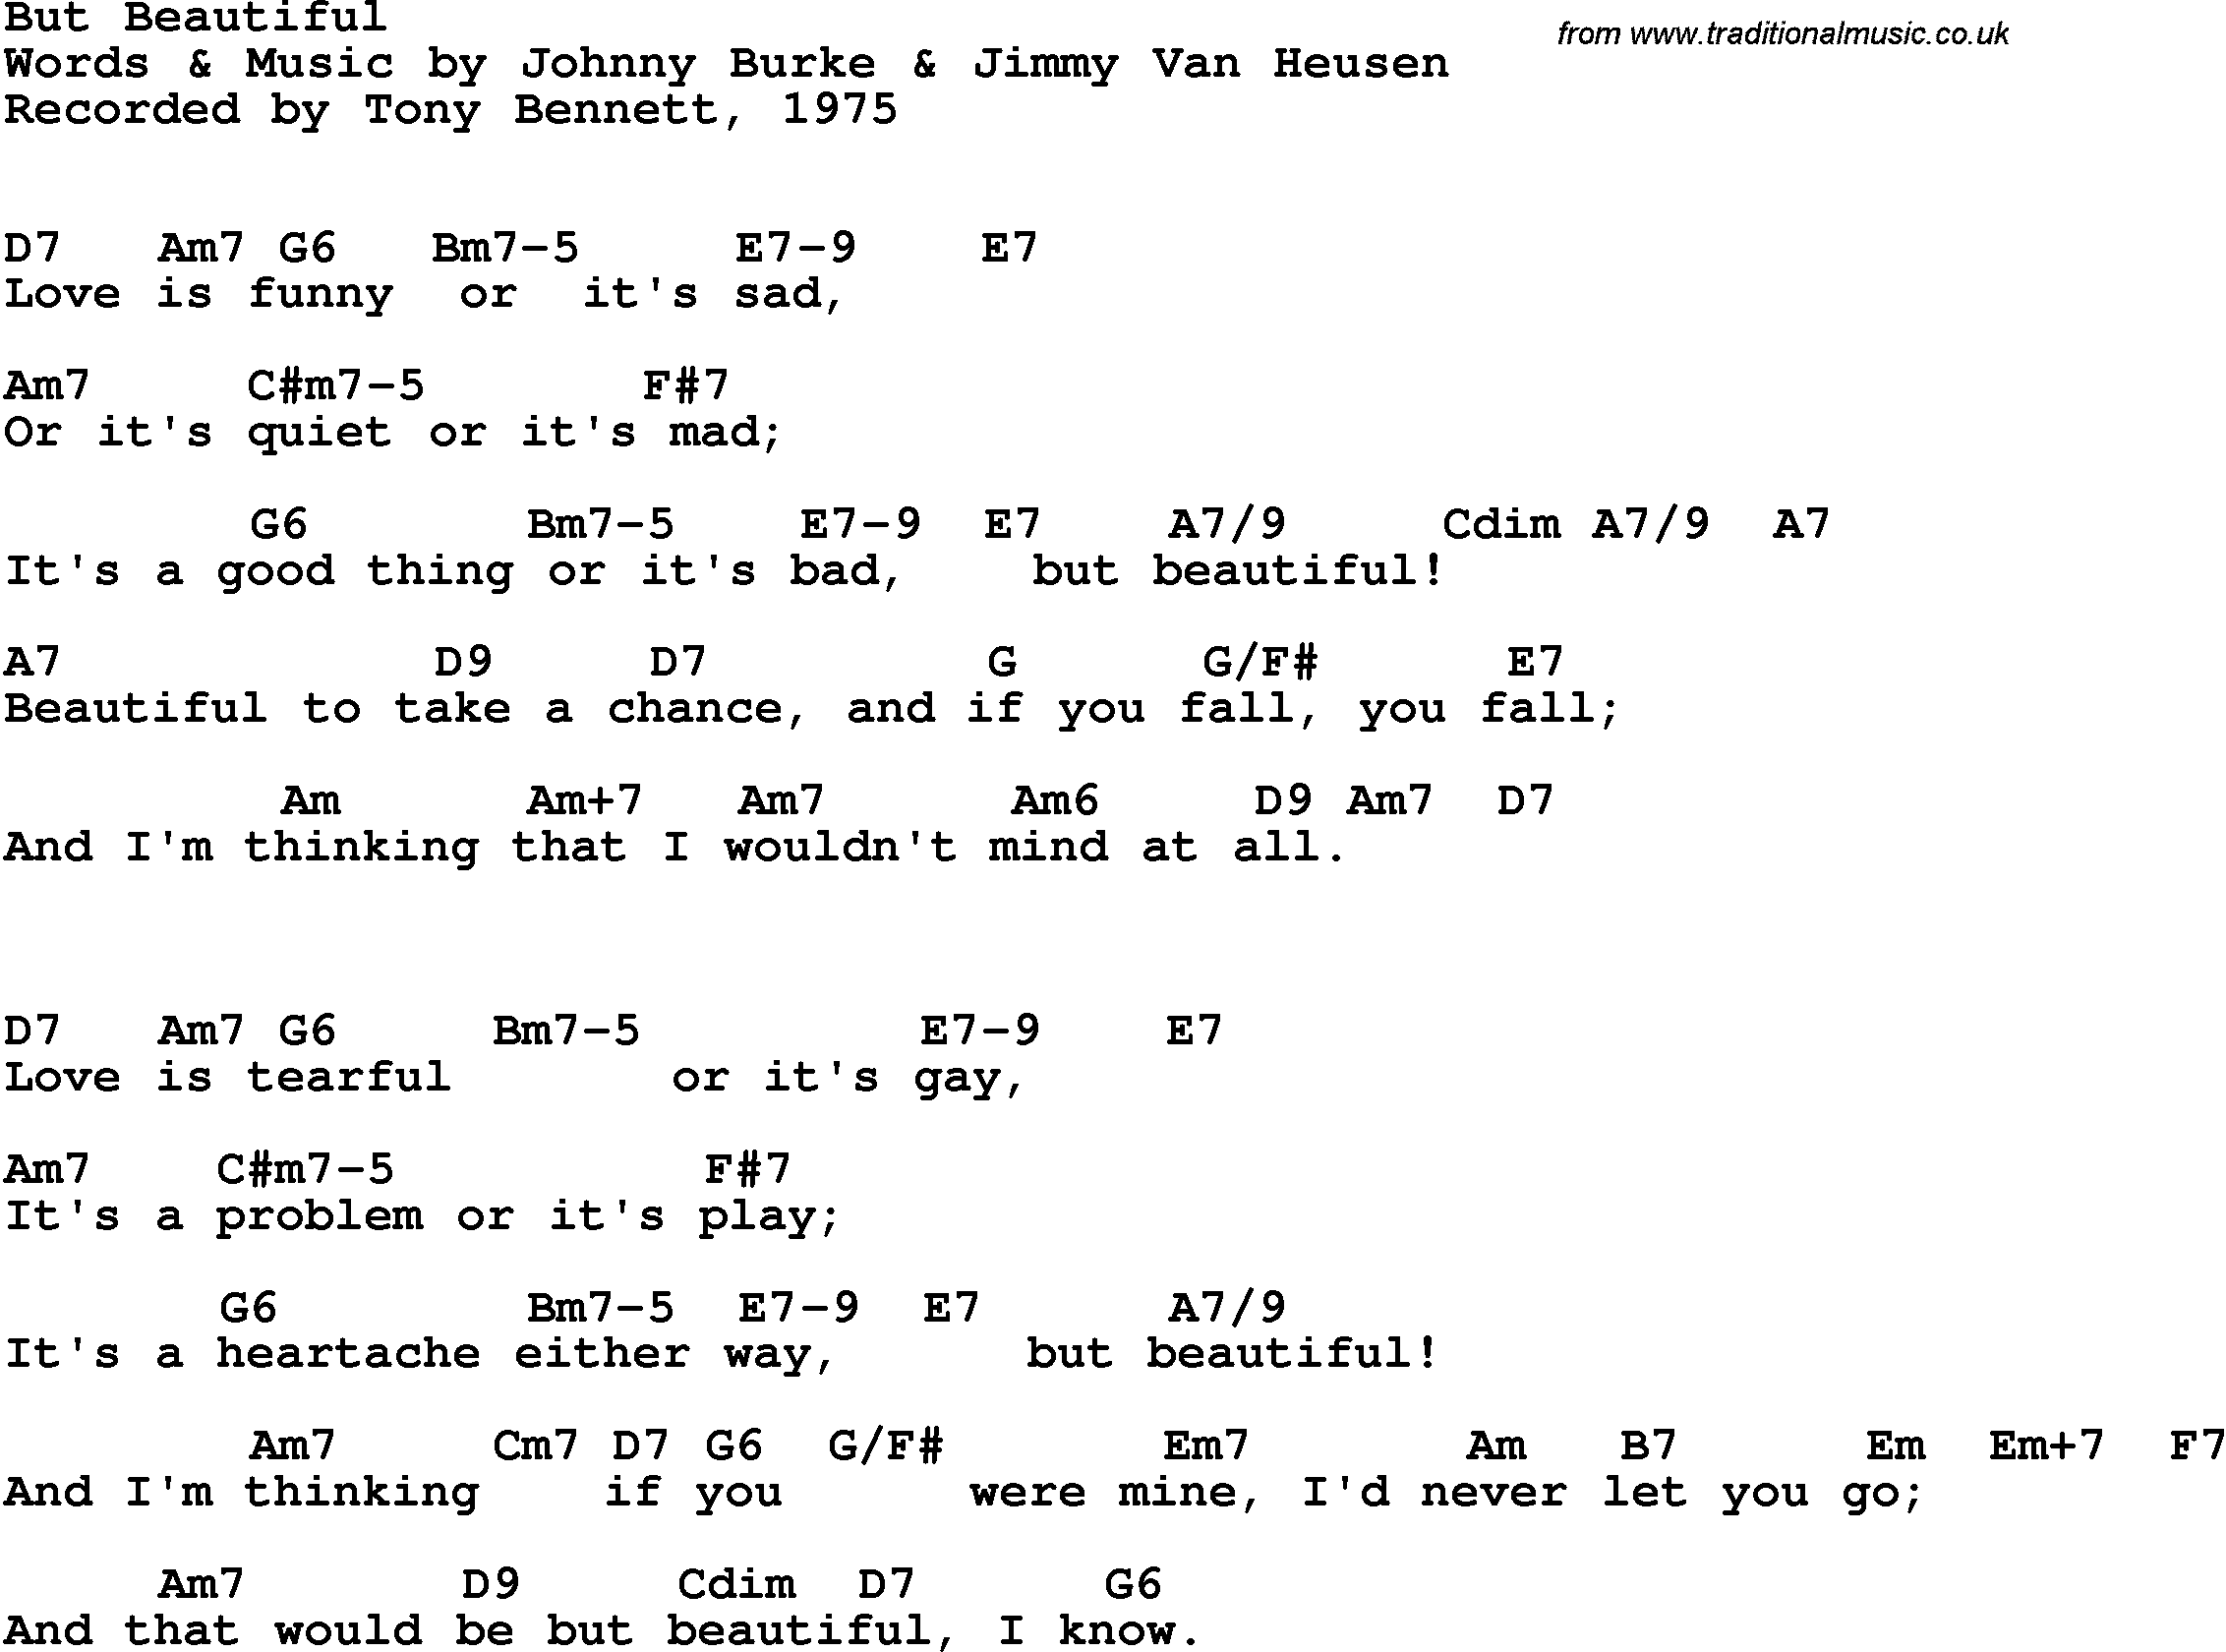 Song Lyrics with guitar chords for But Beautiful - Tony Bennett, 1975